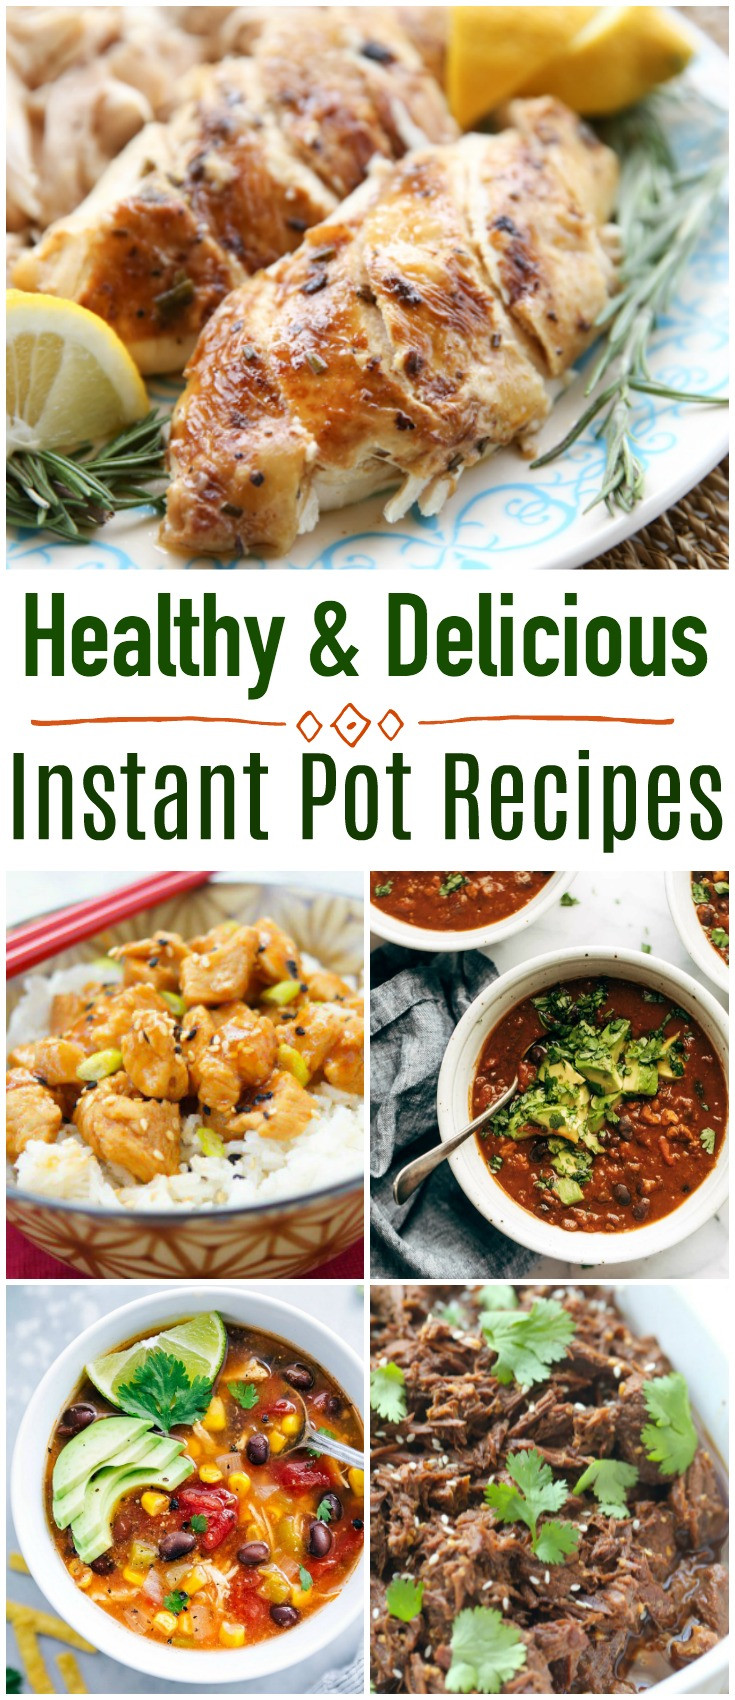 Instant Pot Recipes Healthy
 Healthy and Delicious Recipes for the Instant Pot